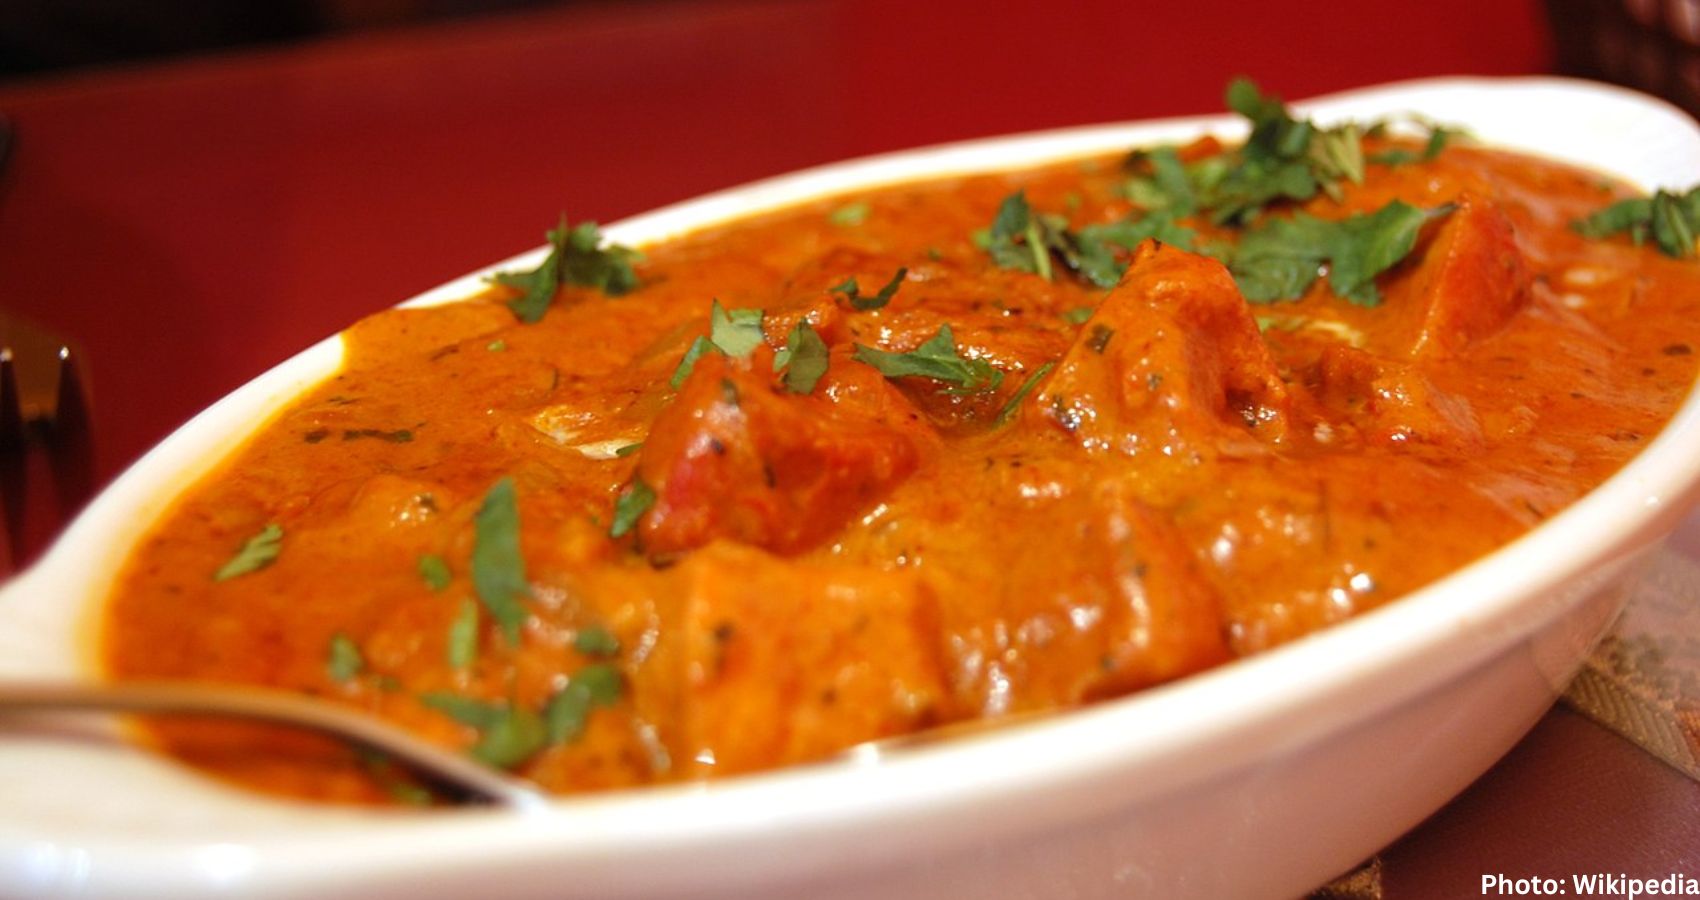 Battle of Butter Chicken: Legal Feud Engulfs Iconic Indian Dish